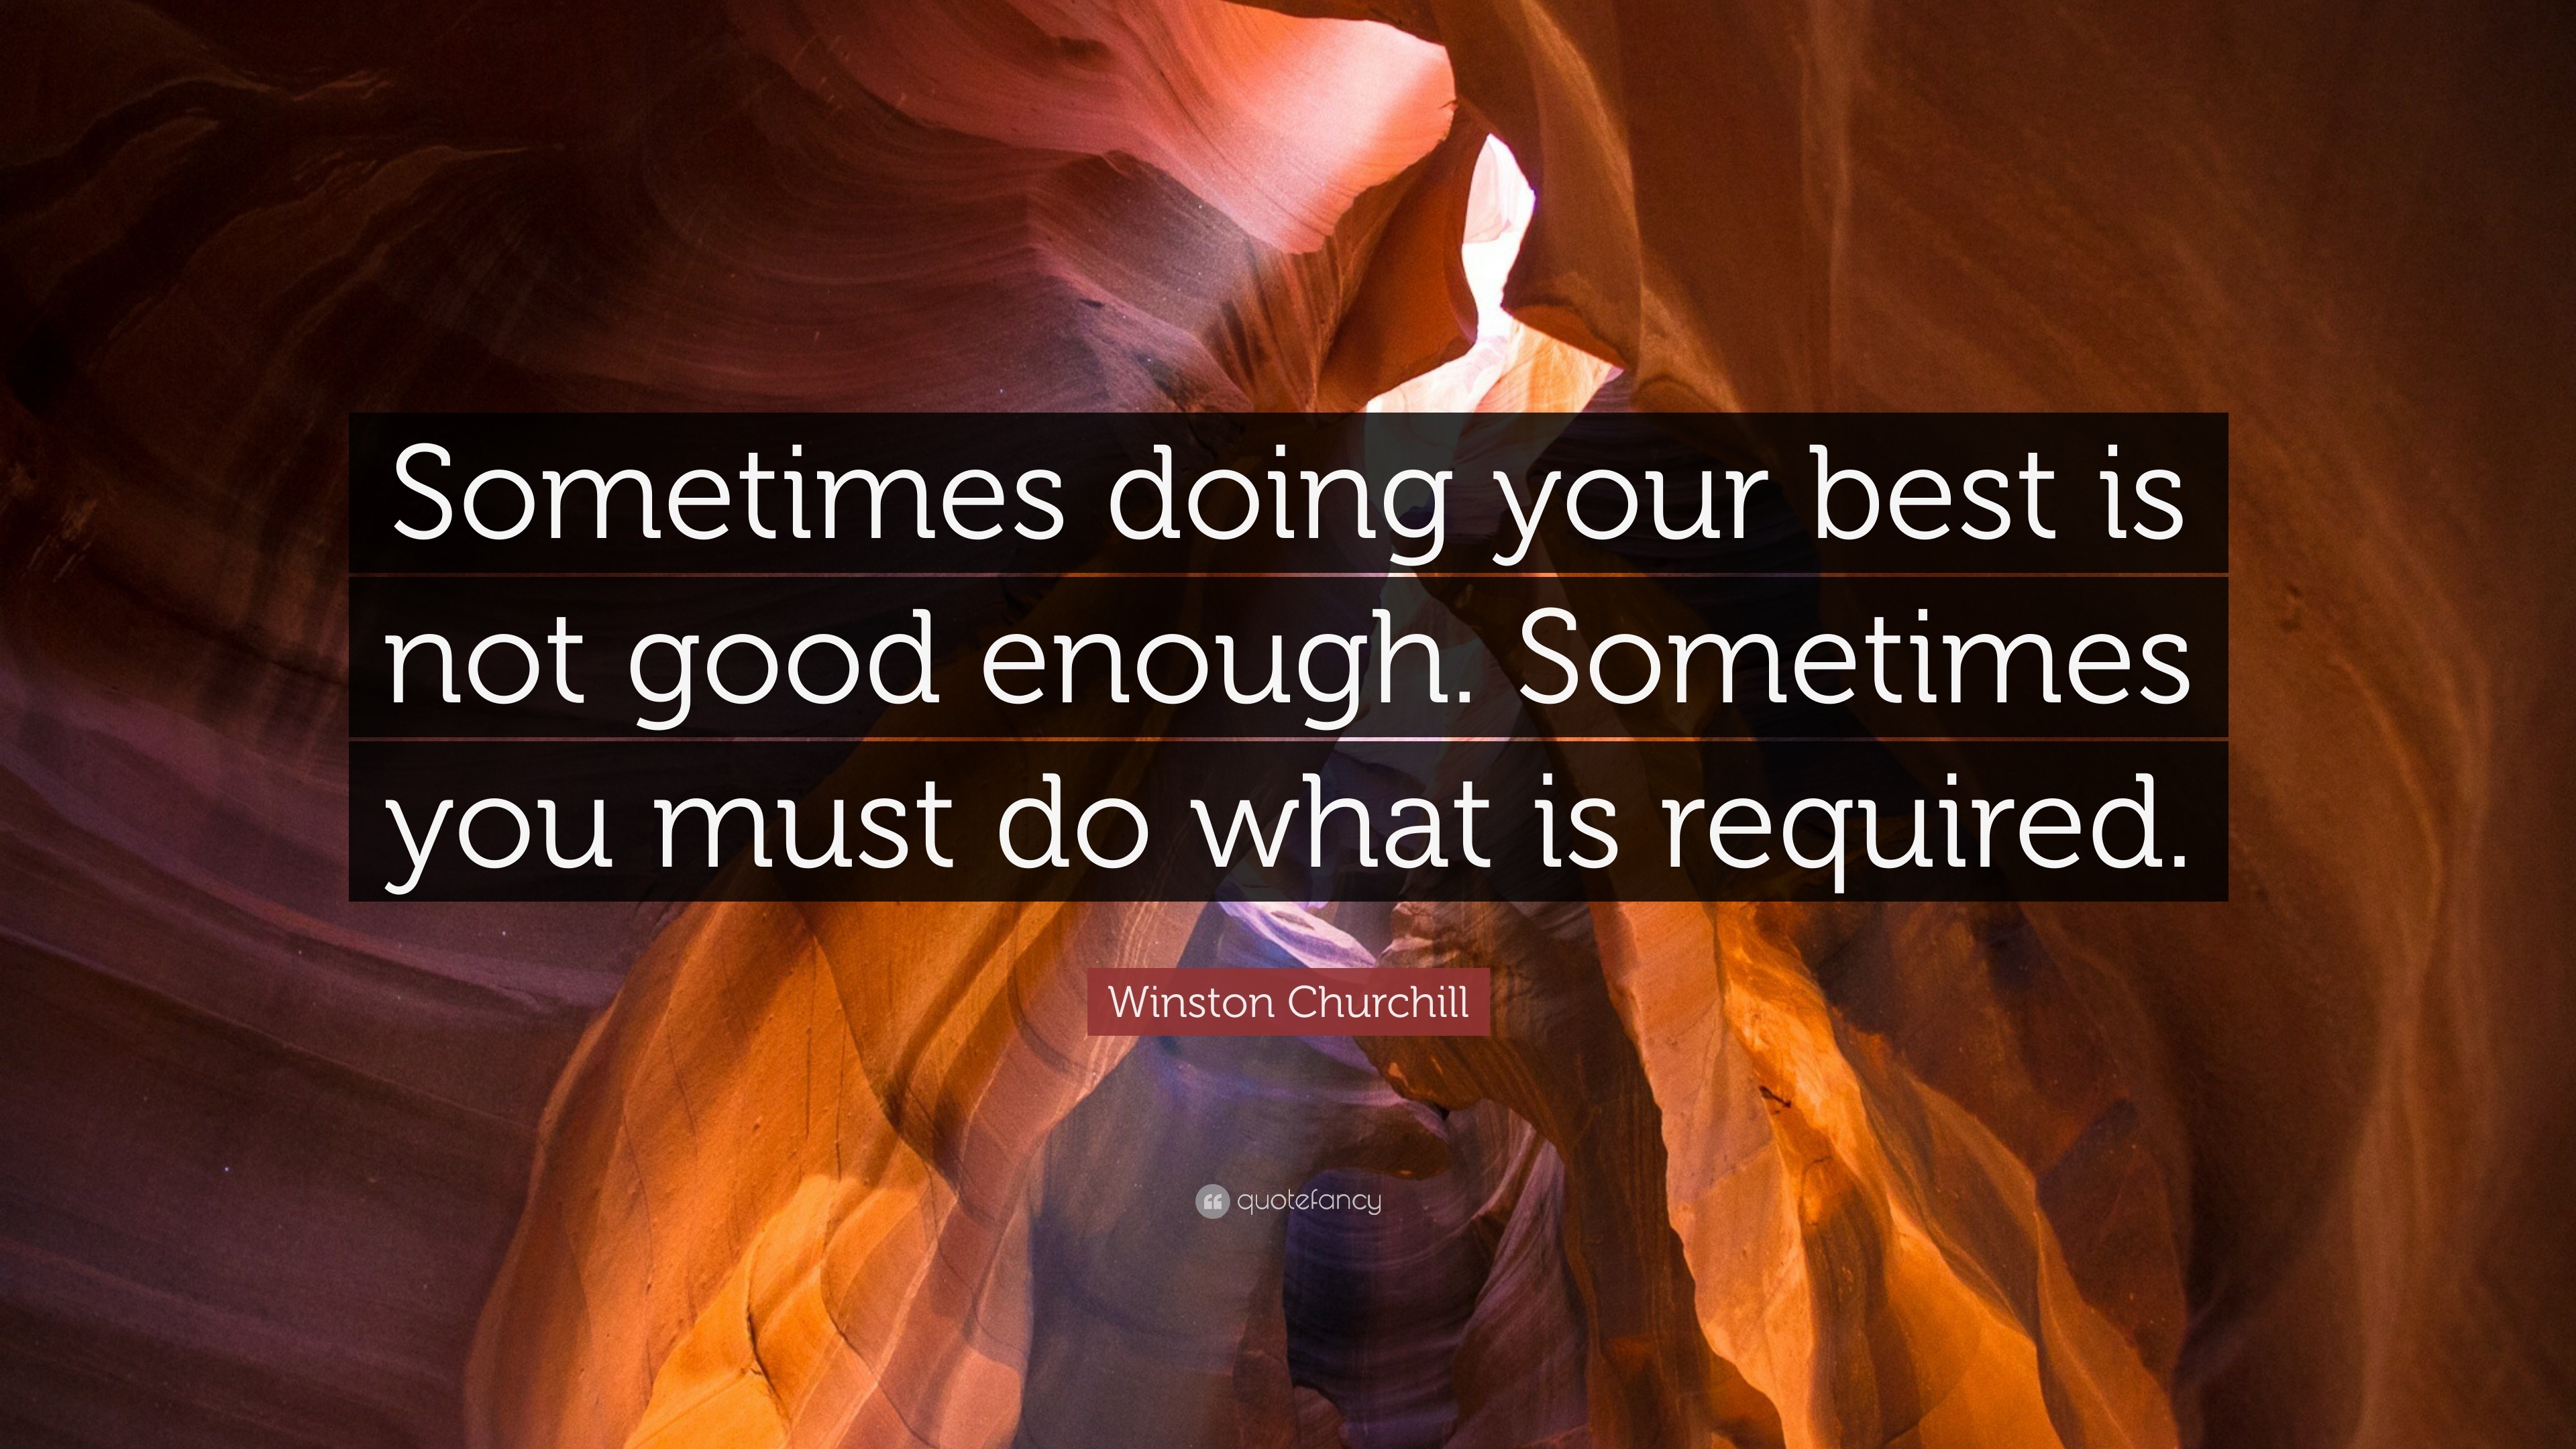 Winston Churchill Quote “Sometimes doing your best is not good enough Sometimes you